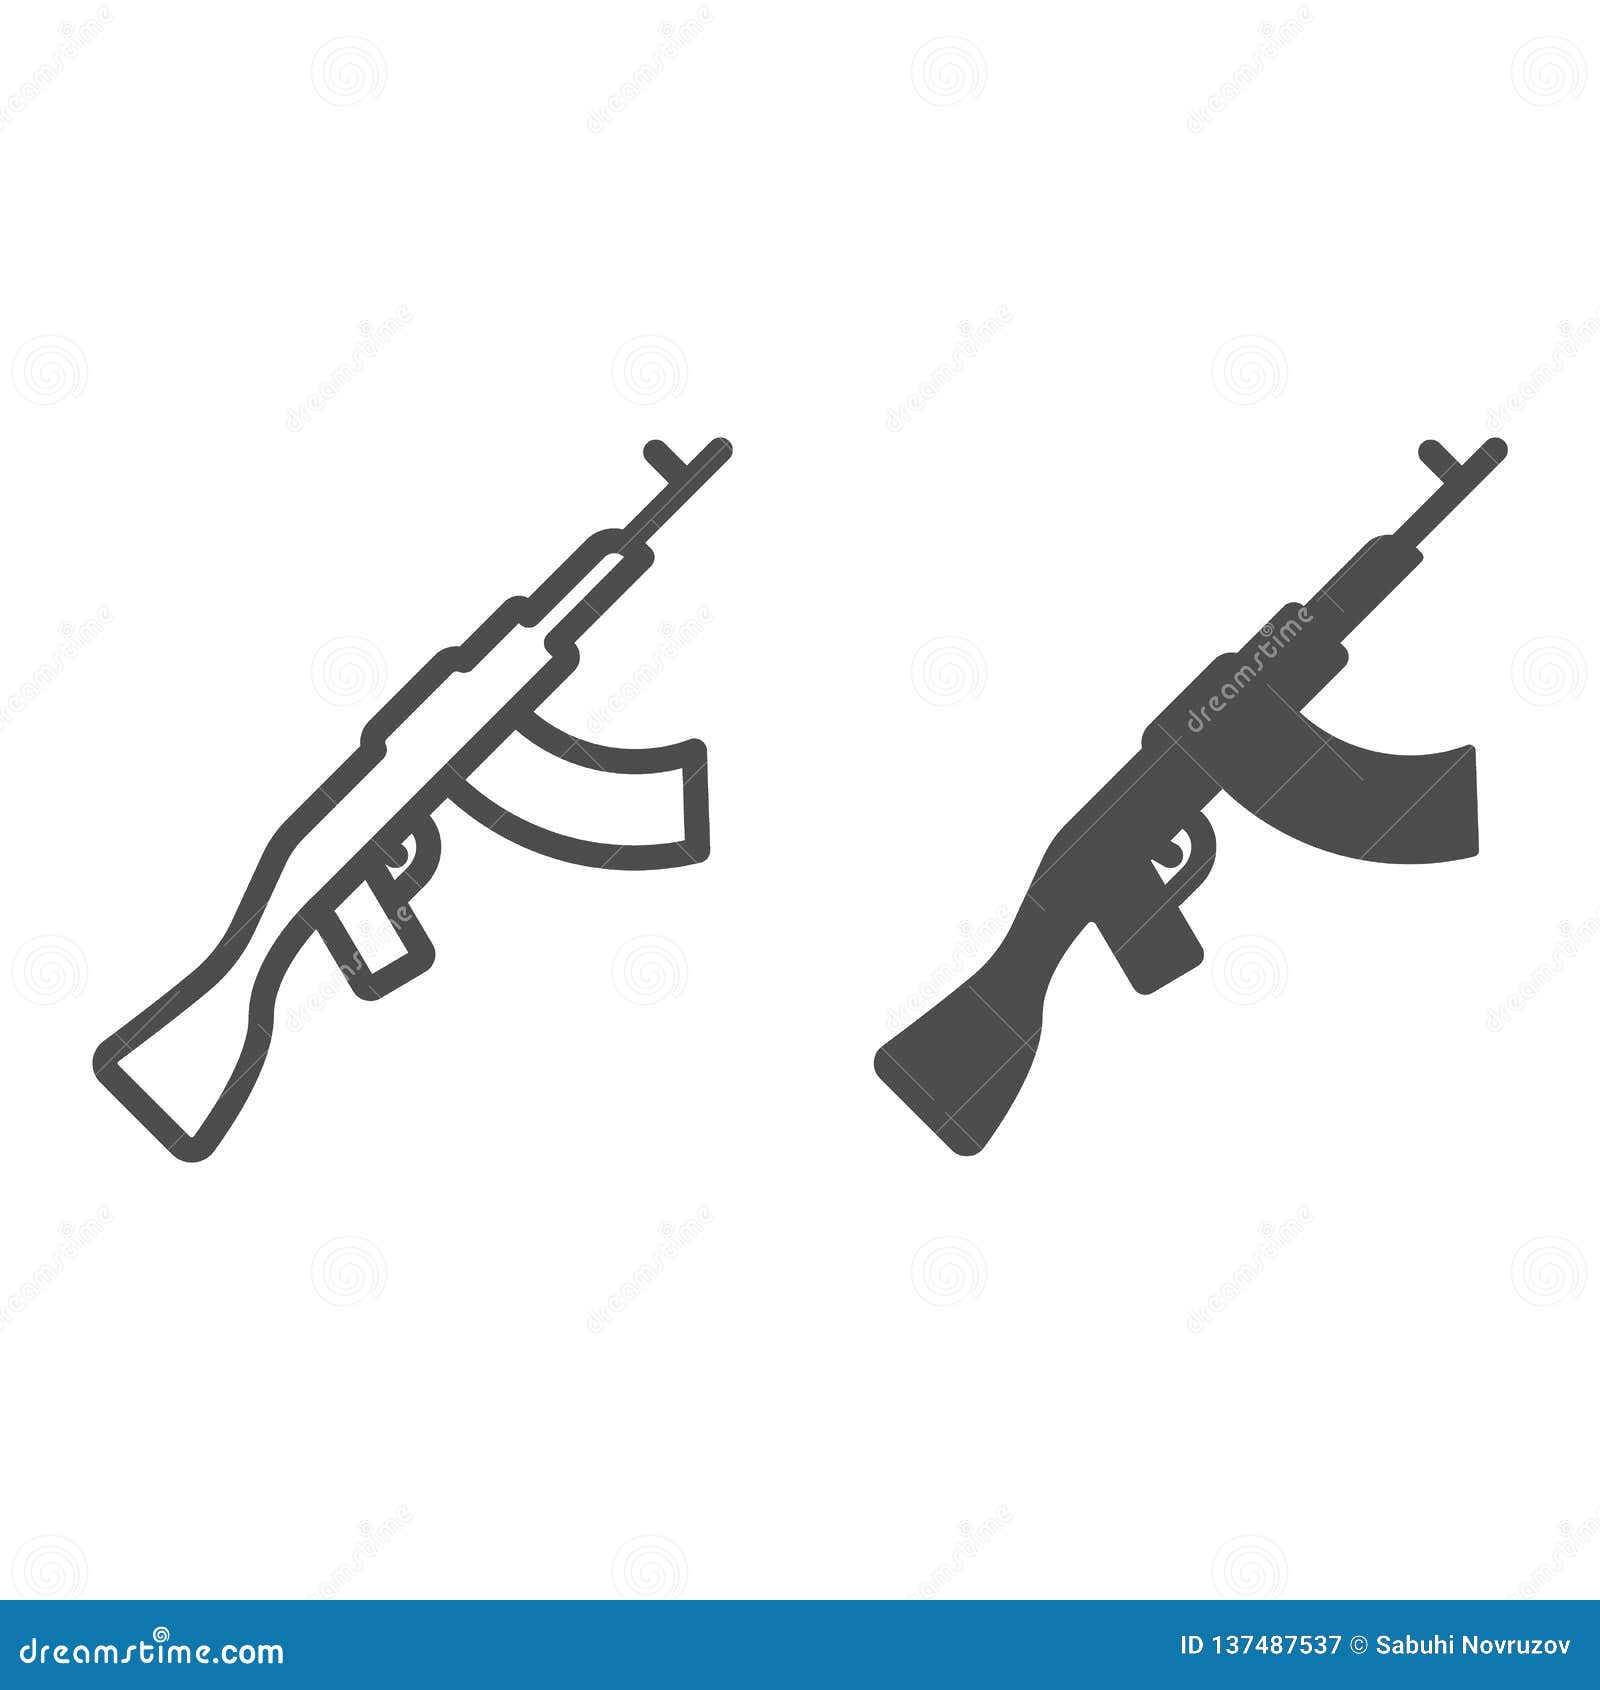 Ak47 vector illustration isolated on white. 